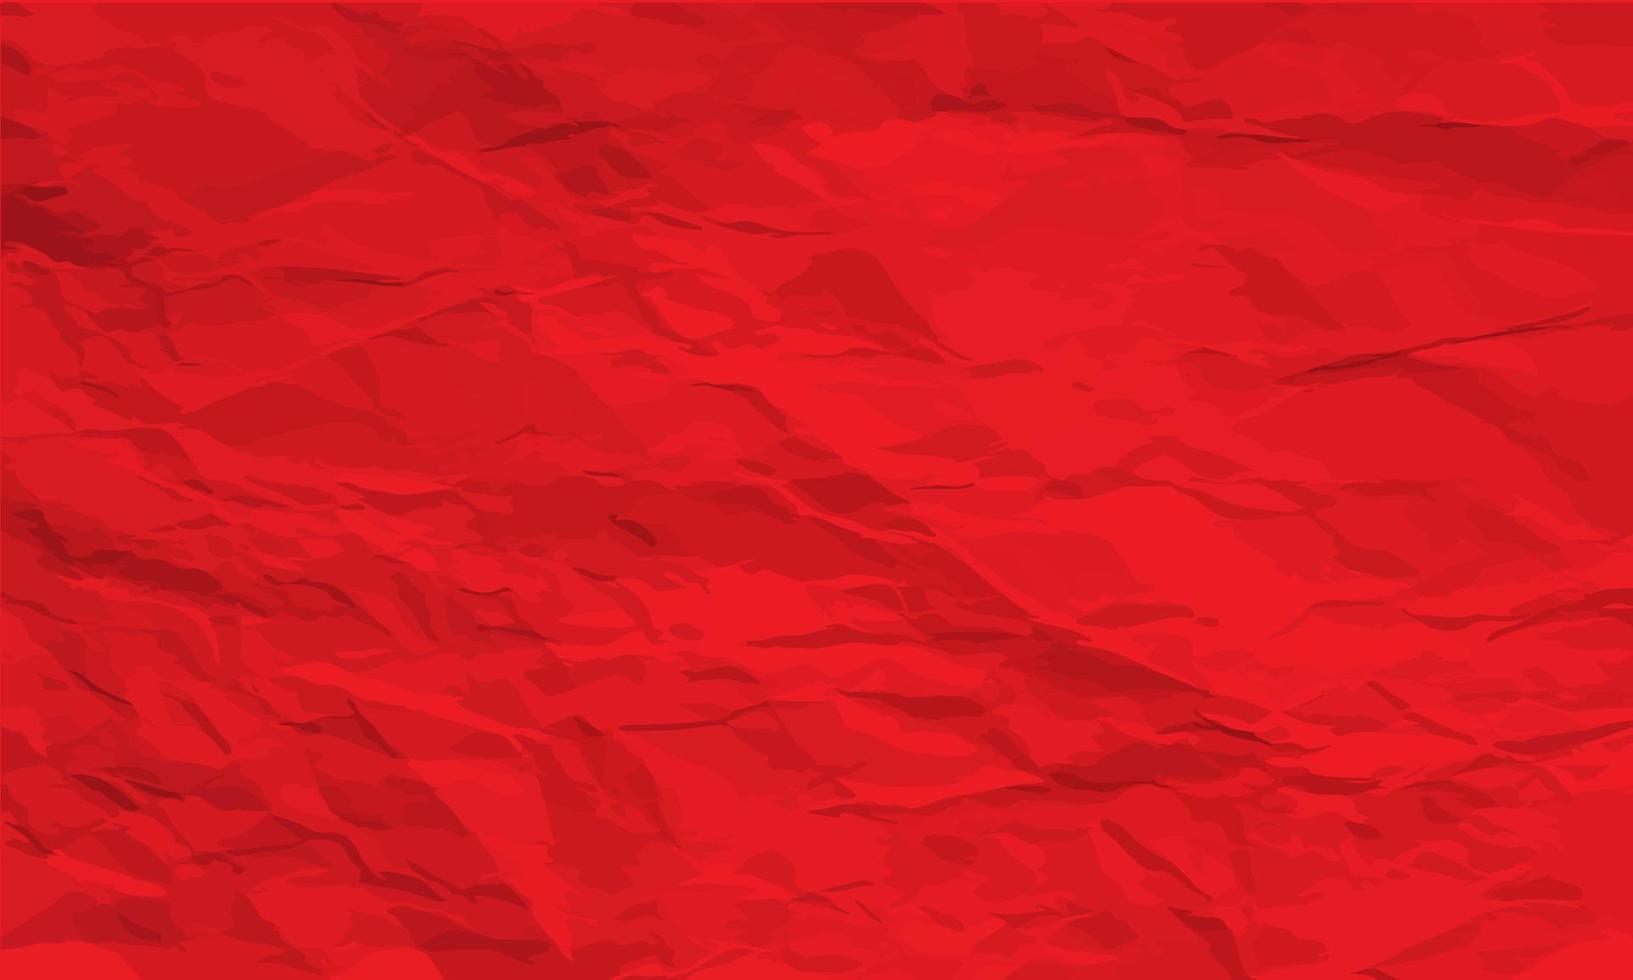 Red wide crumpled paper texture background. crush paper so that it becomes creased and wrinkled. vector